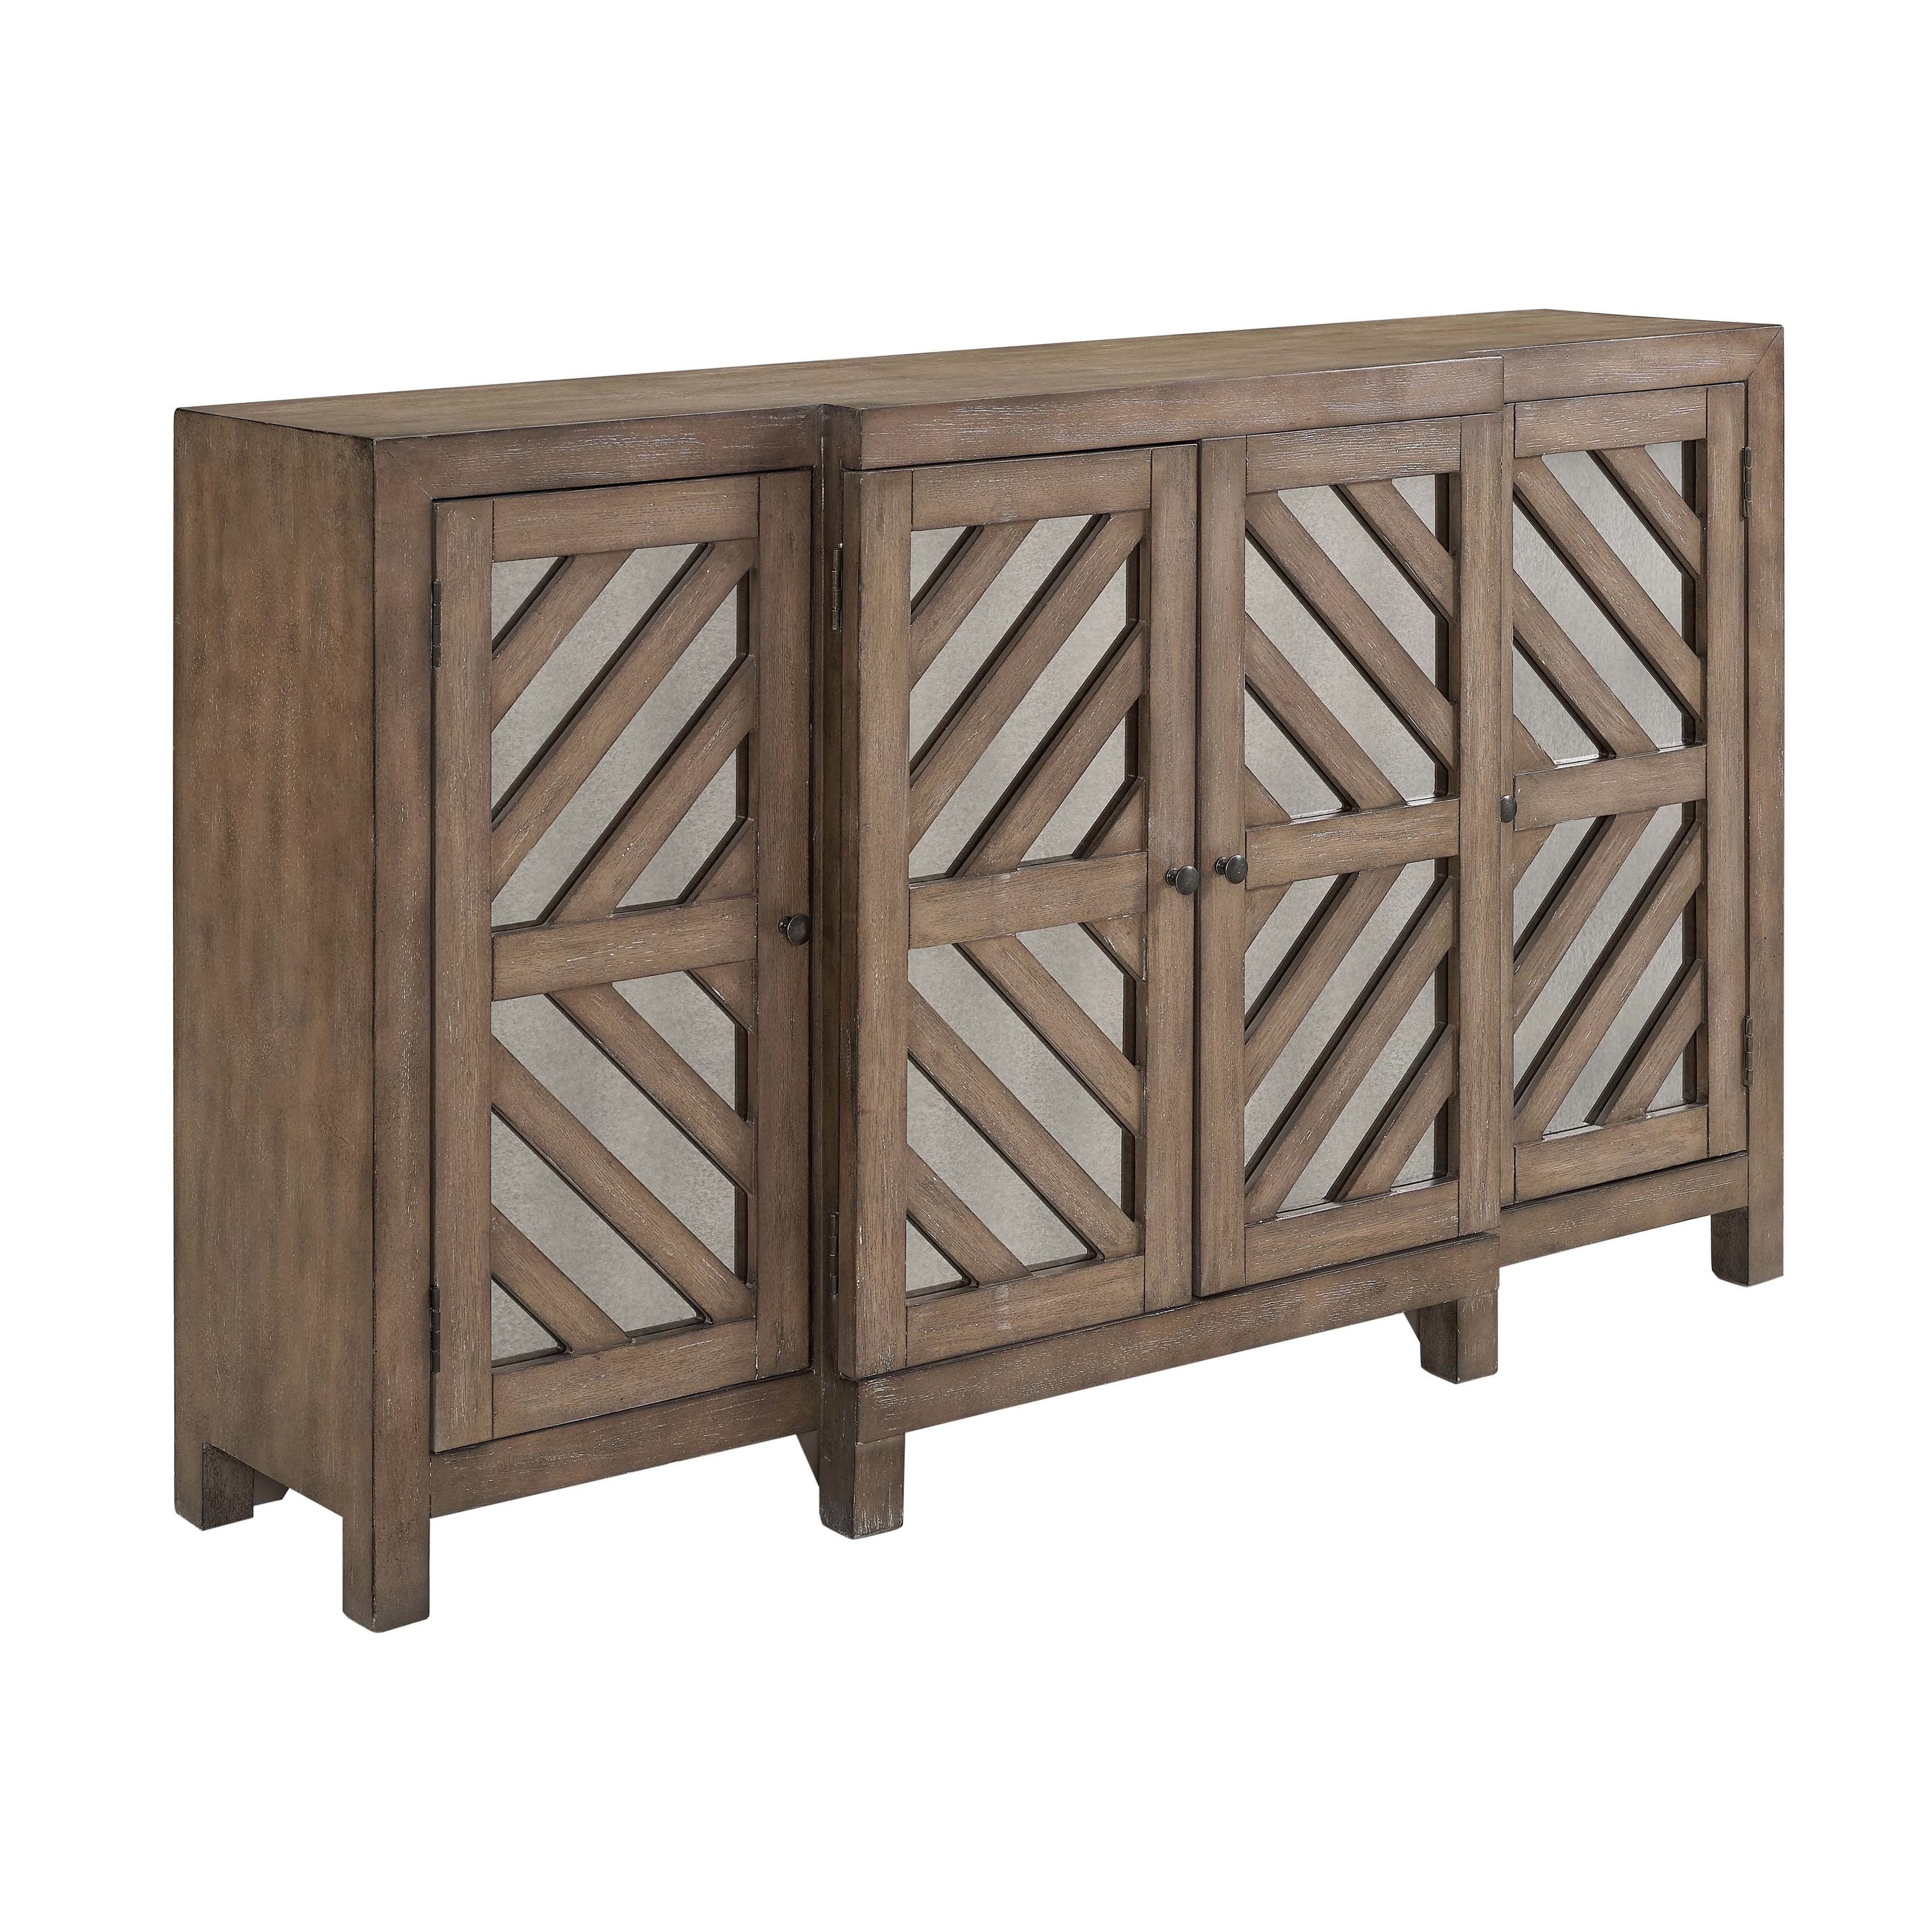 Farmhouse & Rustic Sideboards & Buffets | Birch Lane With Regard To Velazco Sideboards (View 21 of 30)